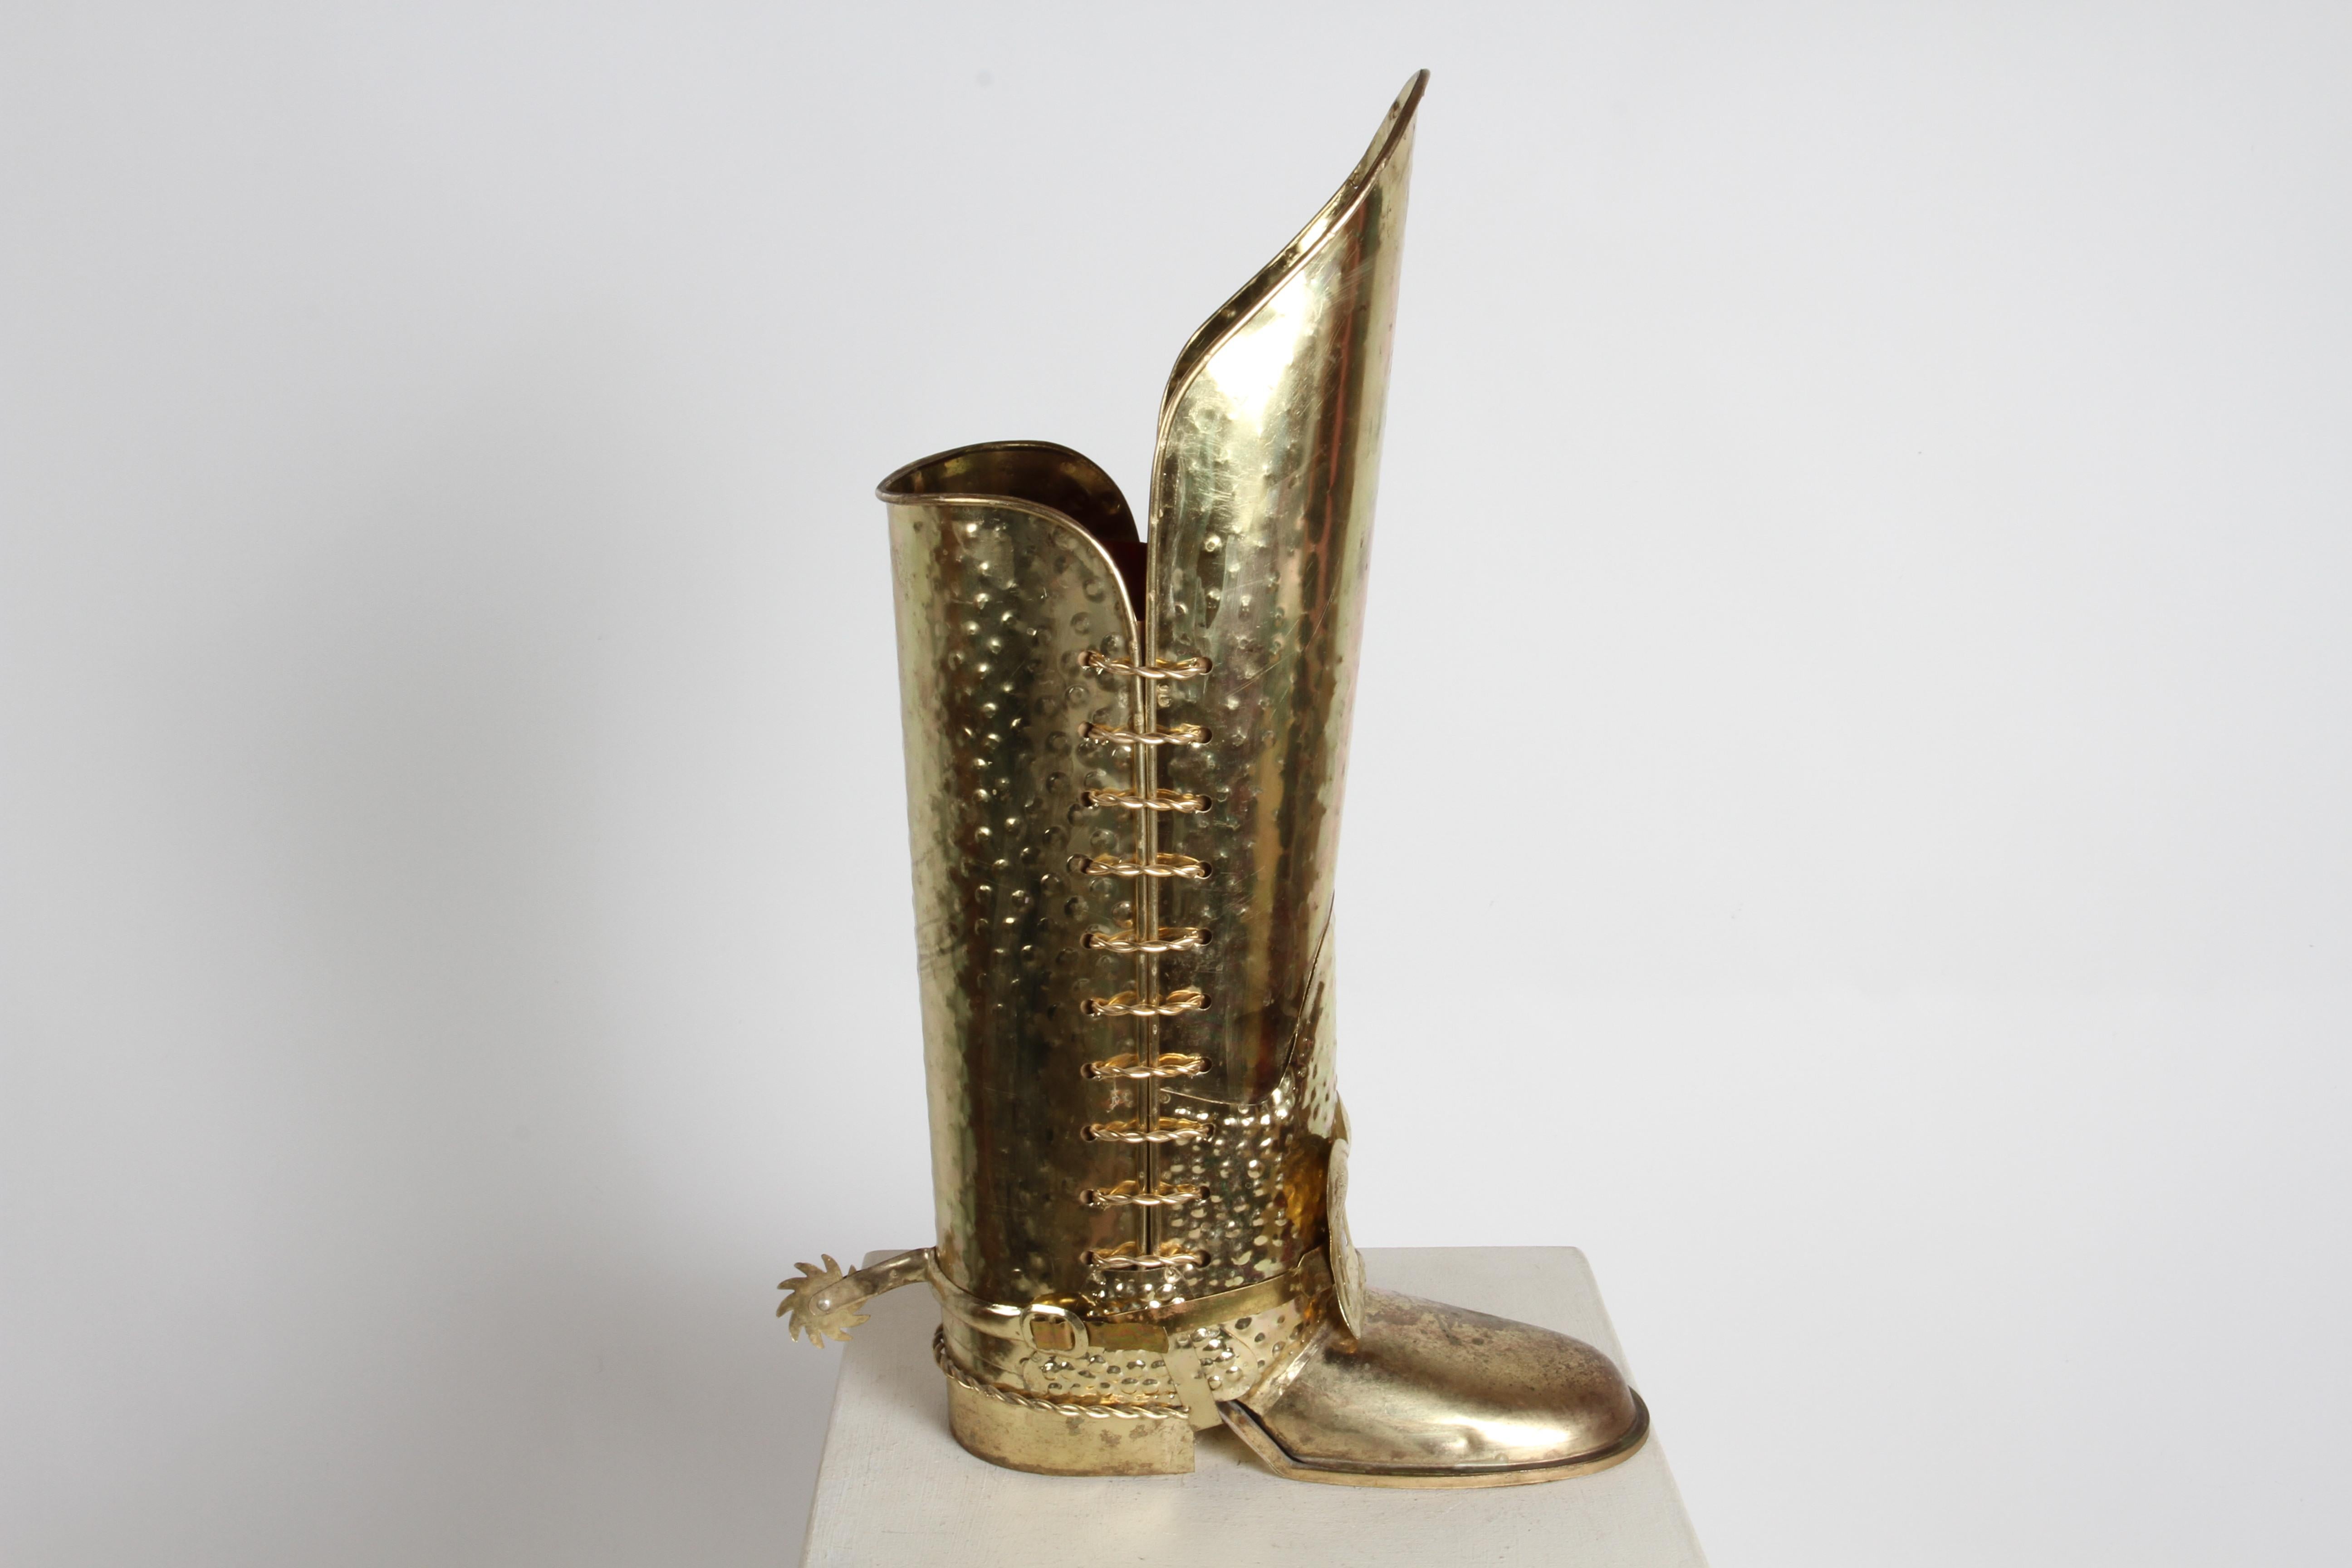 1960s Mid-20th Century Italian Hammered Brass Tall Boot Umbrella Stand with Spur In Good Condition For Sale In St. Louis, MO